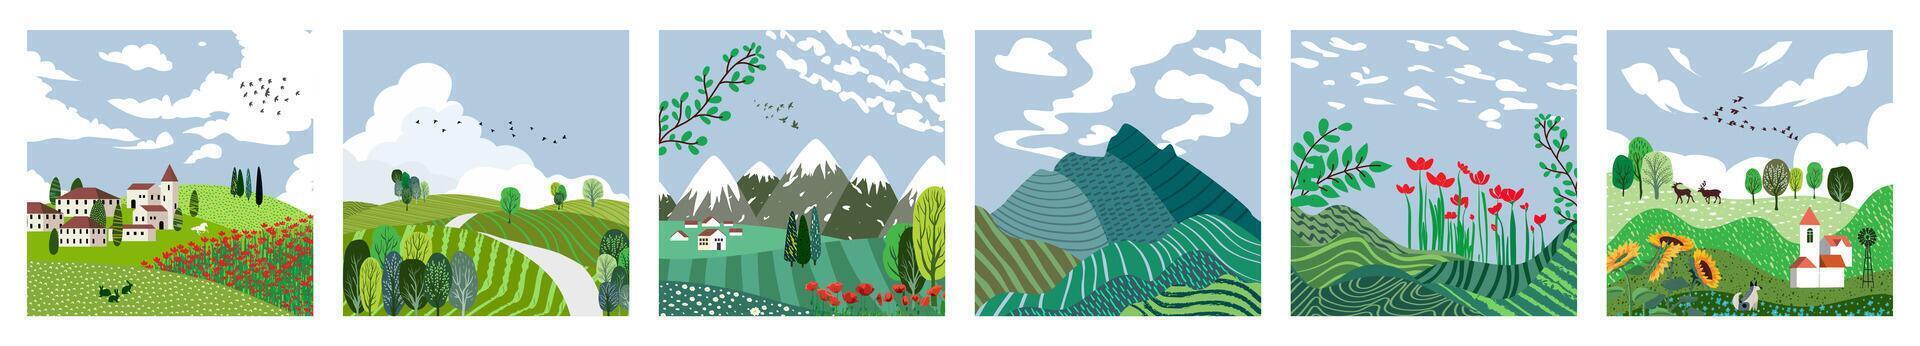 Beautiful countryside, nature and landscape. illustration. vector